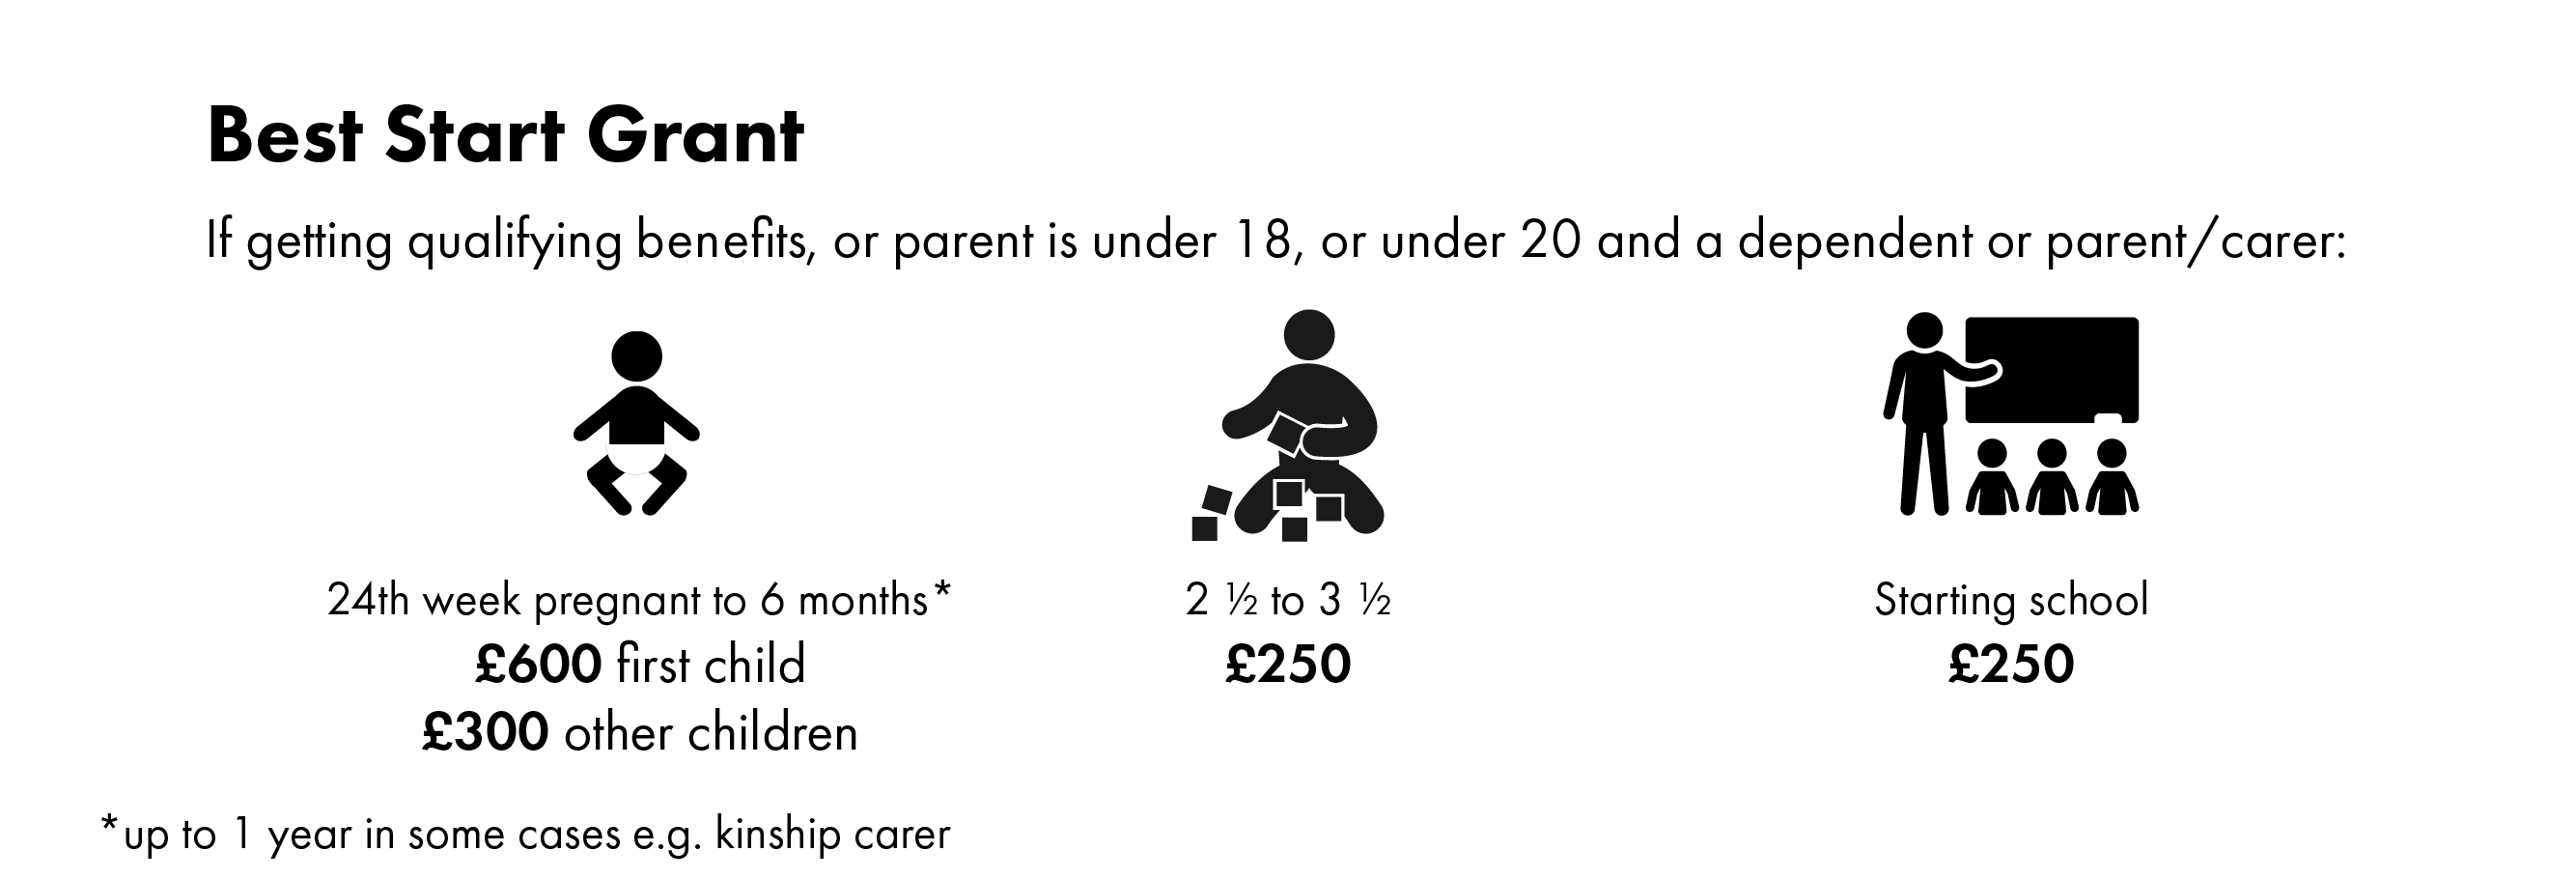 best start grant: £600 for first child, £300 for other children around birth.  £250 at nursery age and £250 around time of starting school.  For parents under 18, dependent young parents and people getting qualifying benefits.